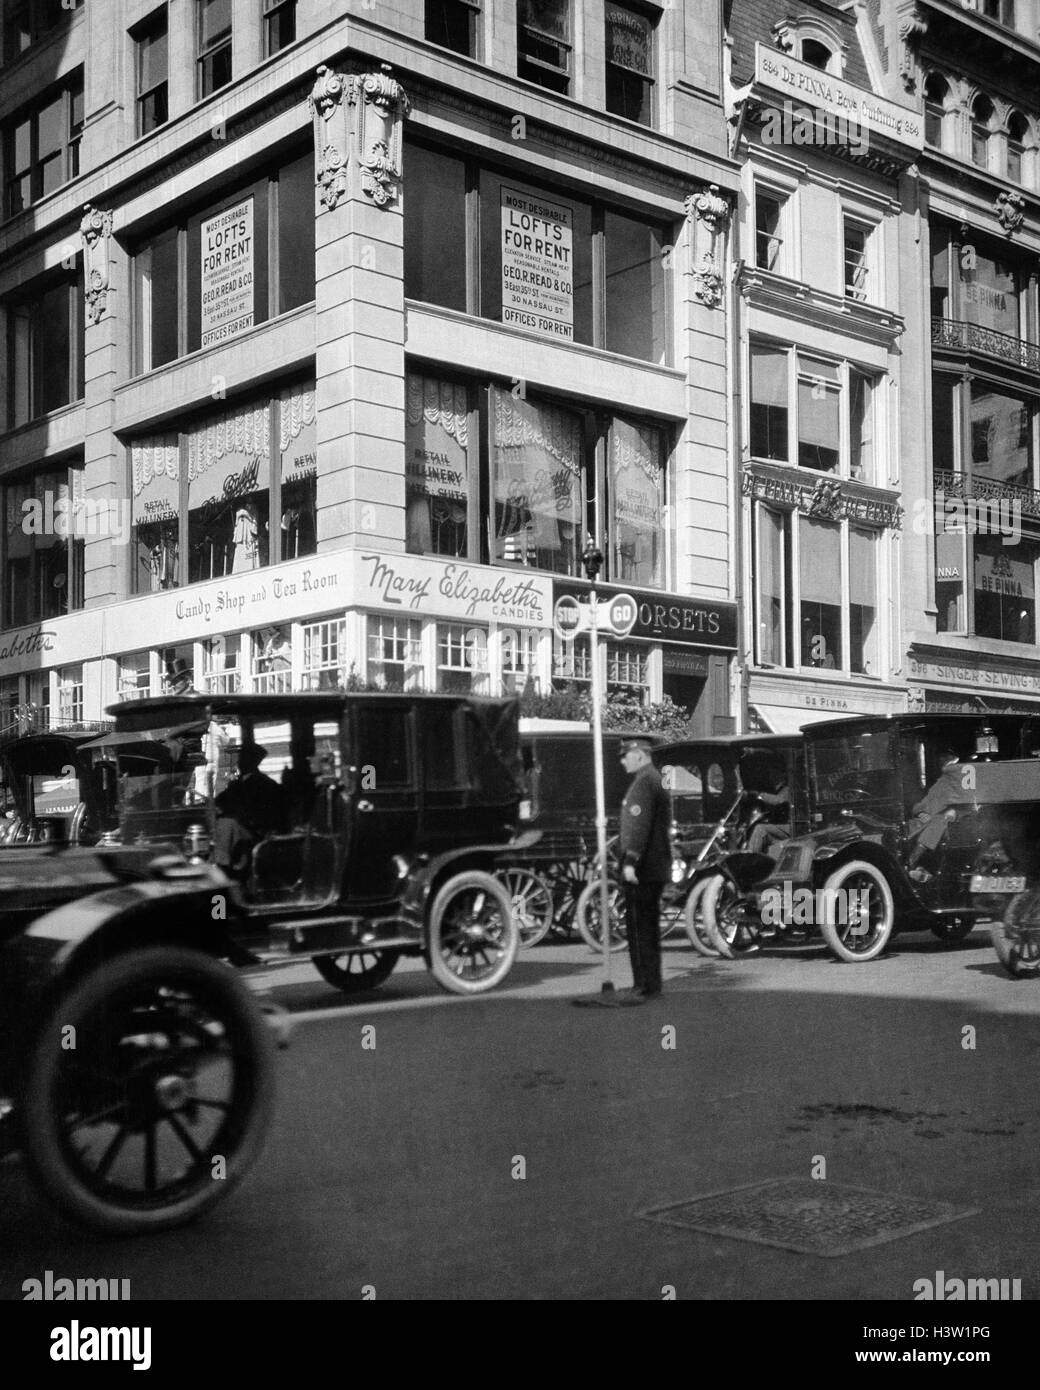 1910s A POLICEMAN CONTROLS TRAFFIC ON FIFTH AVENUE BEFORE WWI USING A HAND OPERATED SEMAPHORE SIGNAL NEW YORK CITY USA Stock Photo